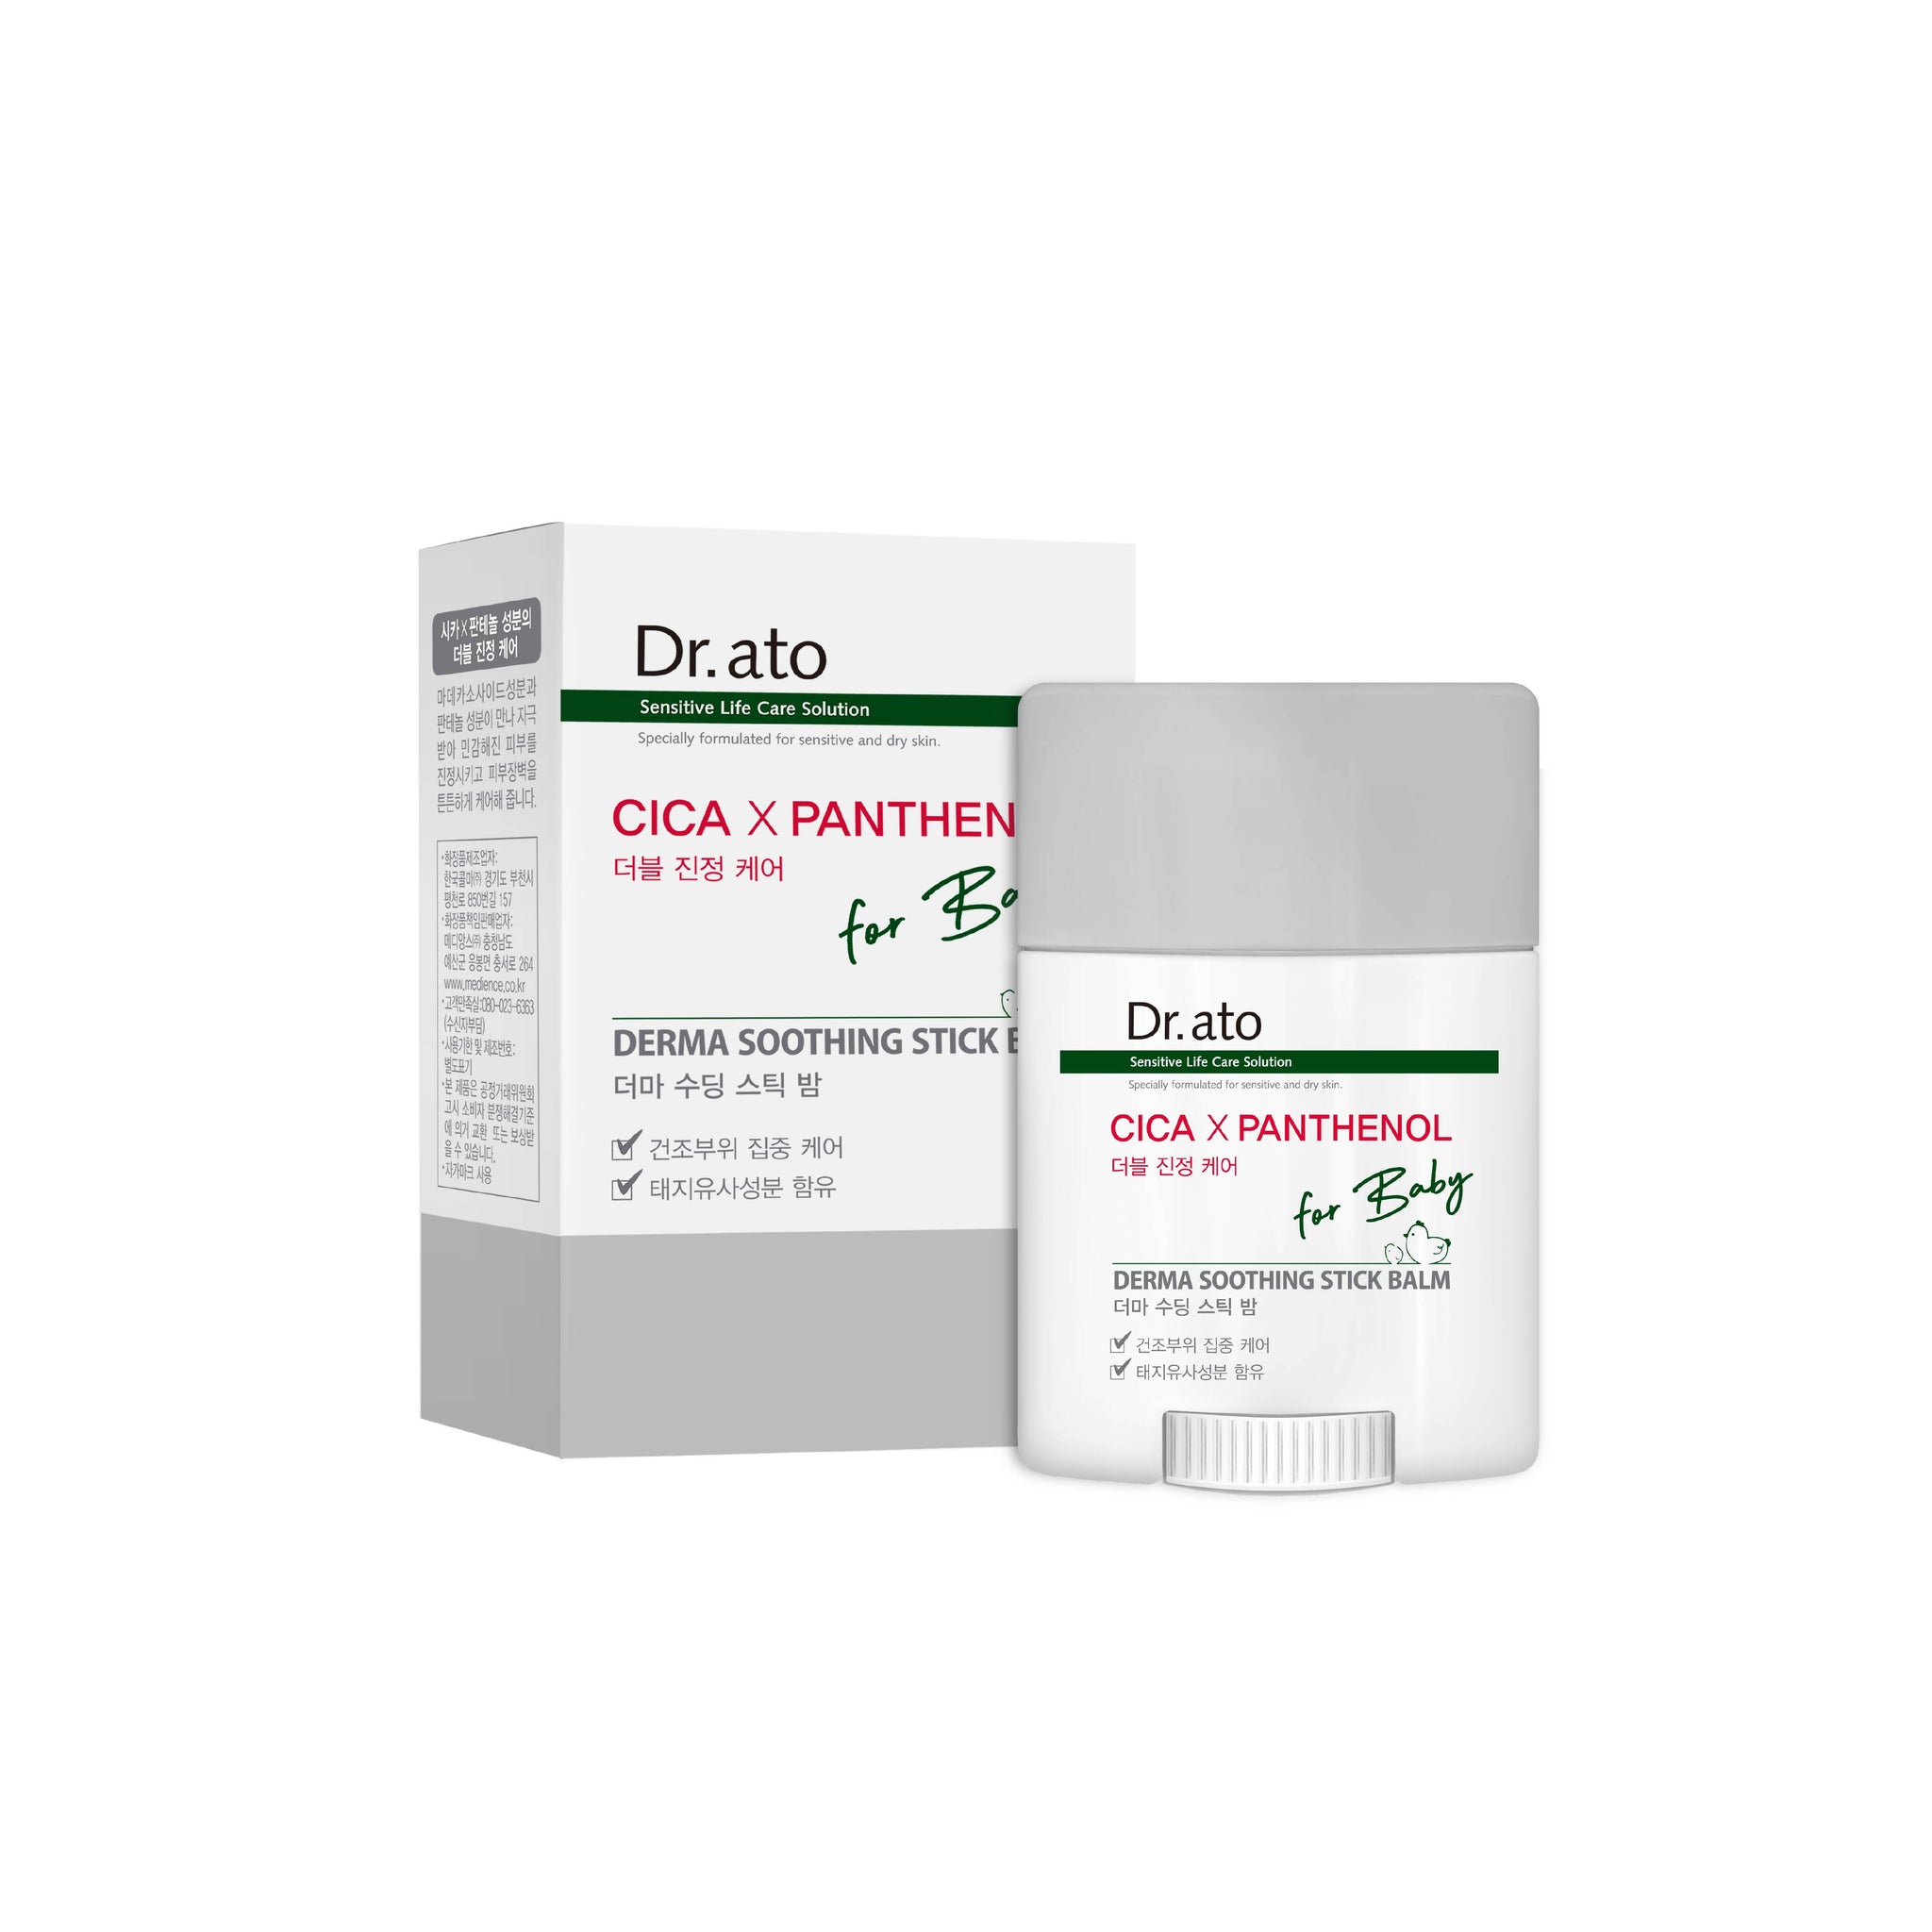 Dr.ato)Derma Soothing Stick Balm 17.5g